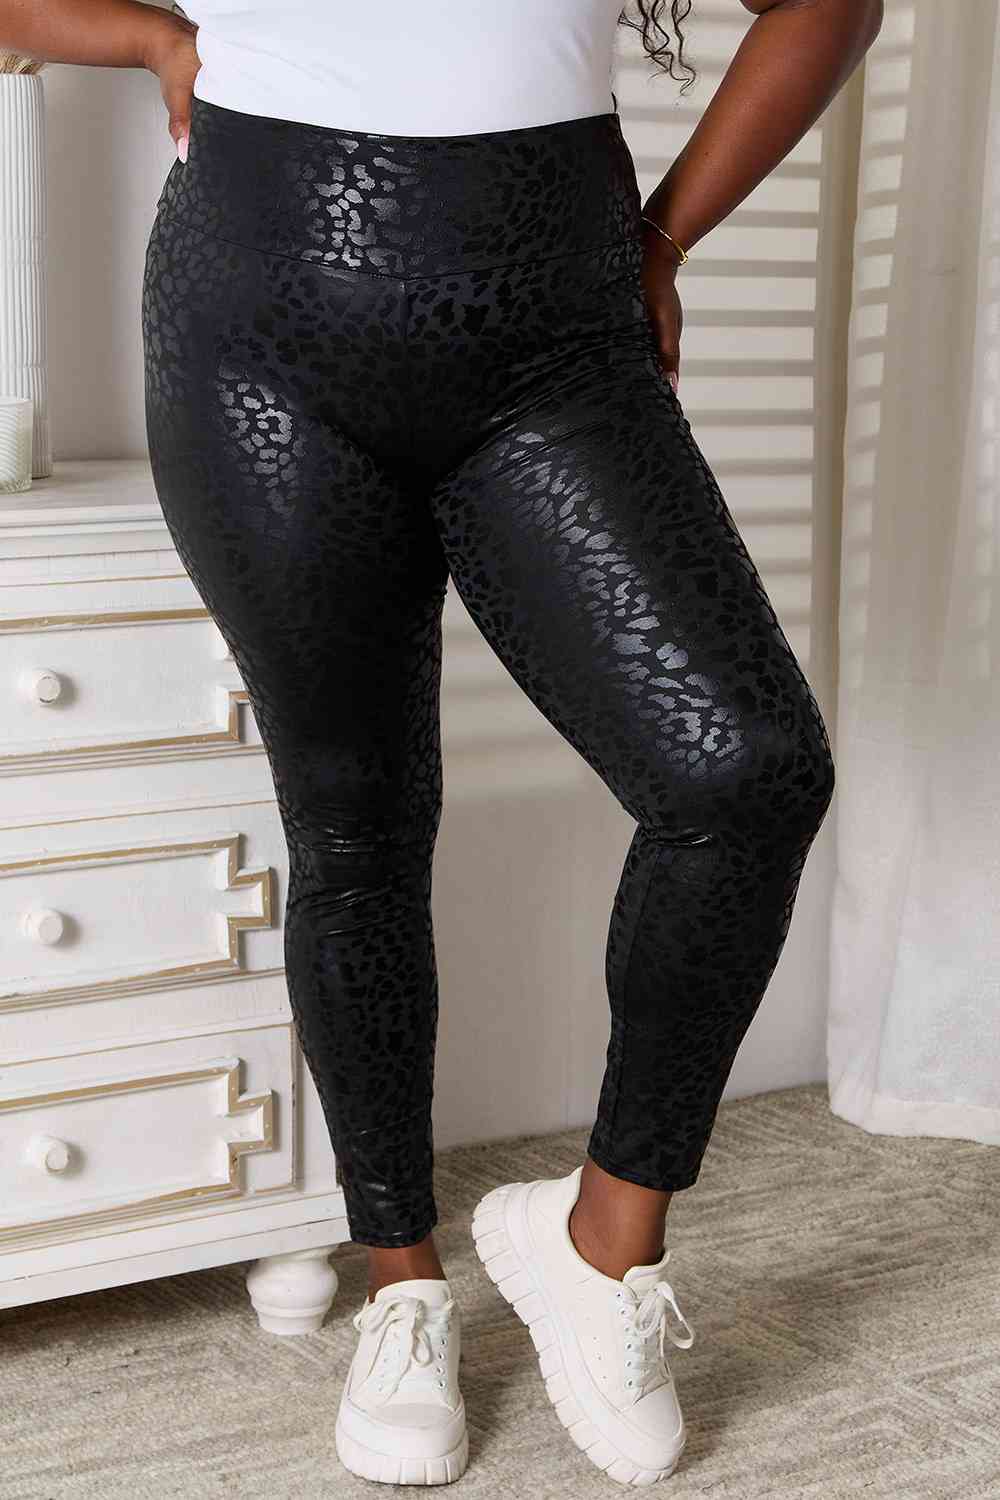 Double Take High Waist Leggings, perfect for workouts or everyday wear- black - closeup of front view